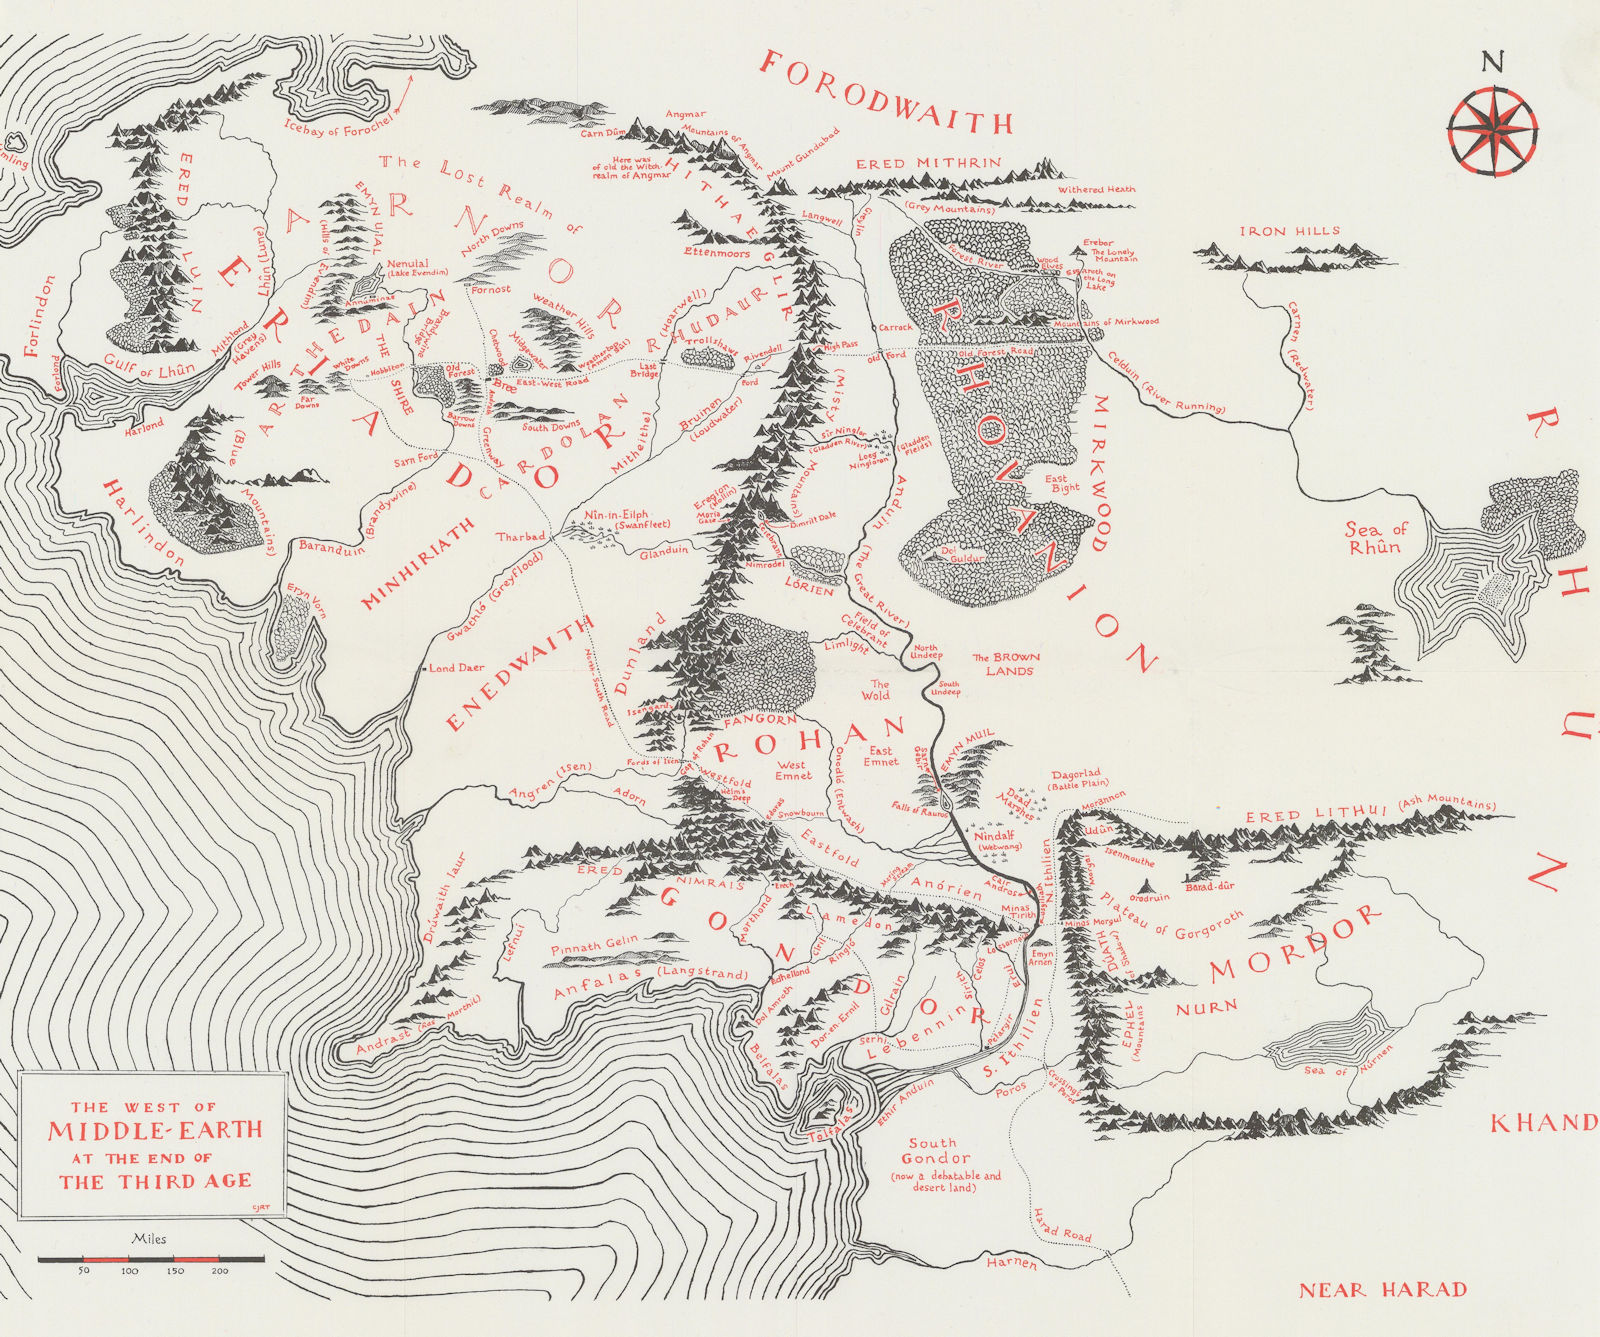 The West of Middle-Earth at the end of the Third Age Lord/Rings TOLKIEN 1987 map